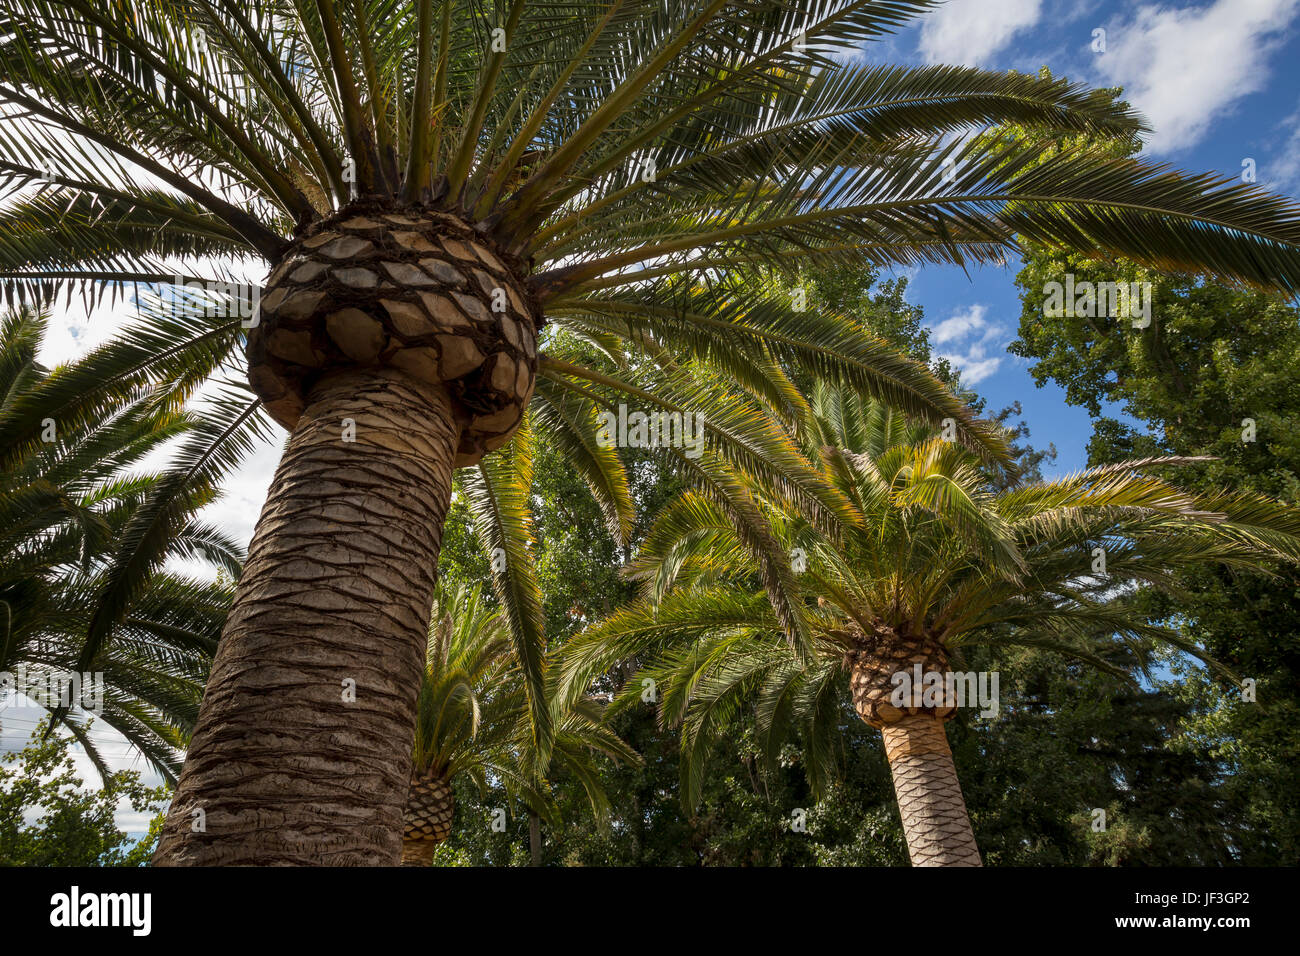 palm trees, garden landscaping, Caymus Vineyards, Rutherford, Napa Valley, Napa County, California Stock Photo